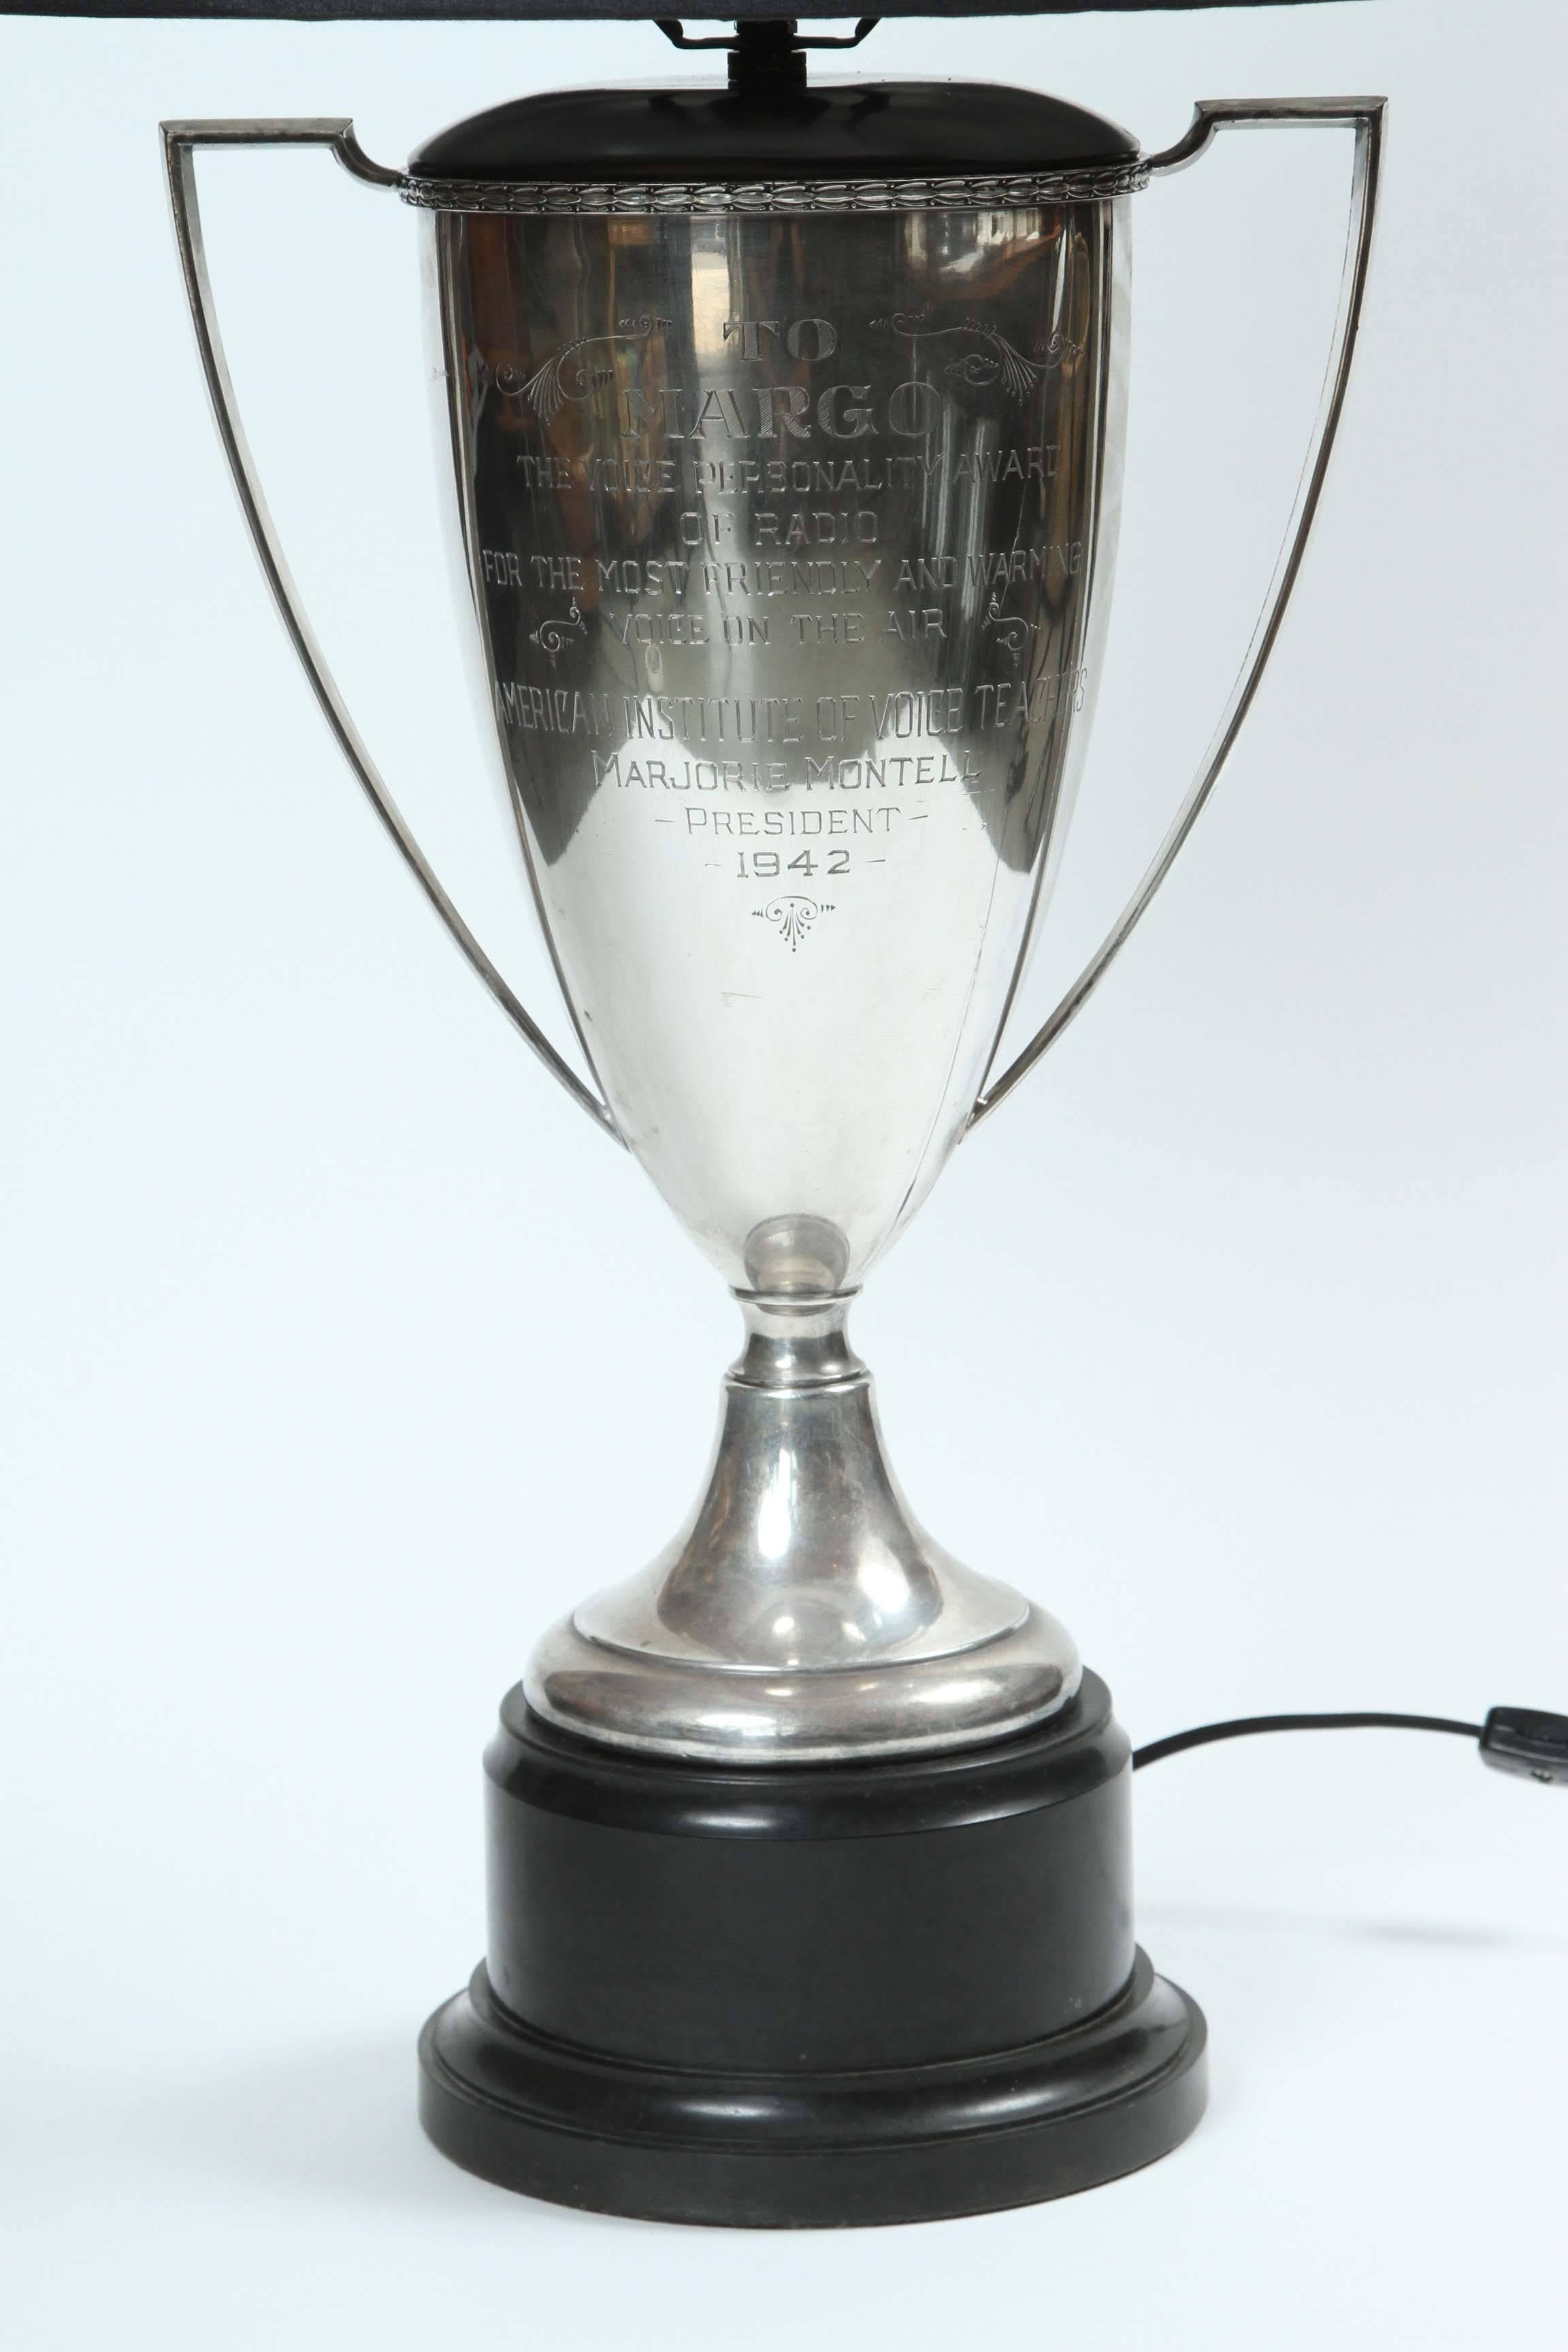 Engraved silver trophy from 1942 that has been newly made into a lamp with a custom black silk shade with silver lining. The base of the lamp is black and has a dimmer switch on the cord as well as on the trophy itself.